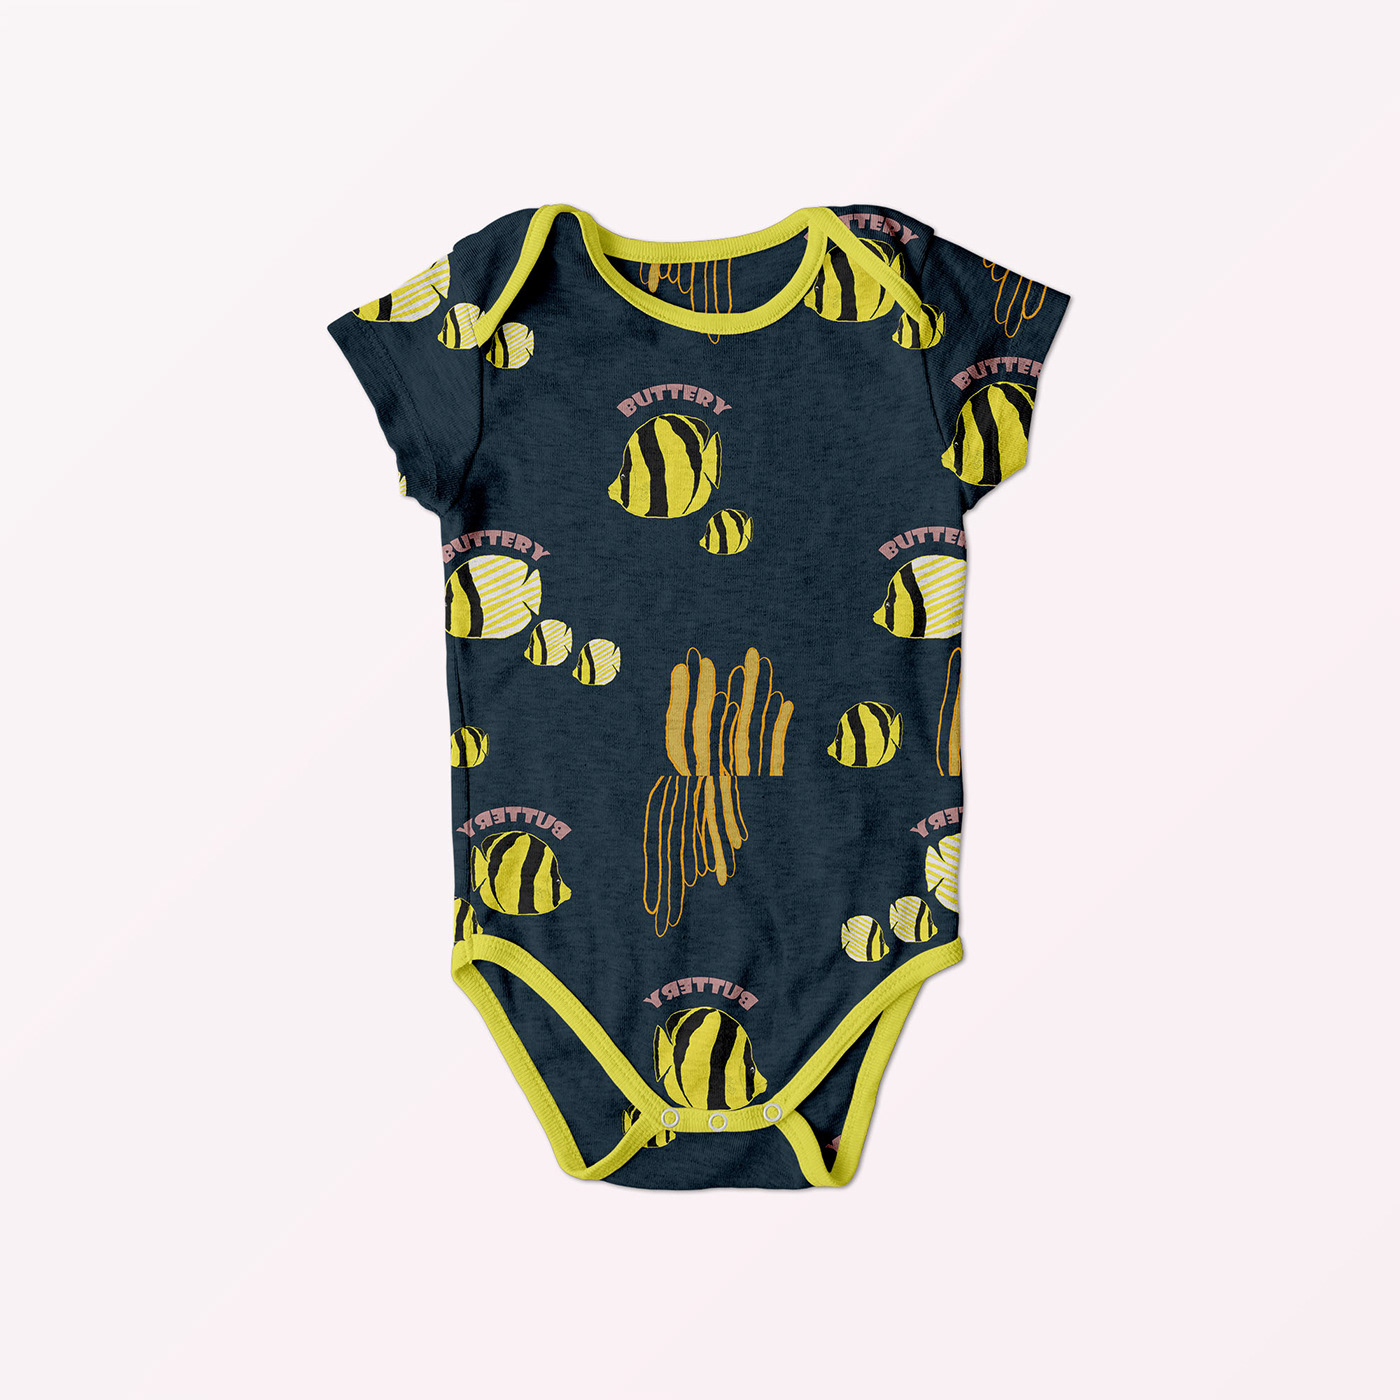 Butterfly jumpsuit for babies